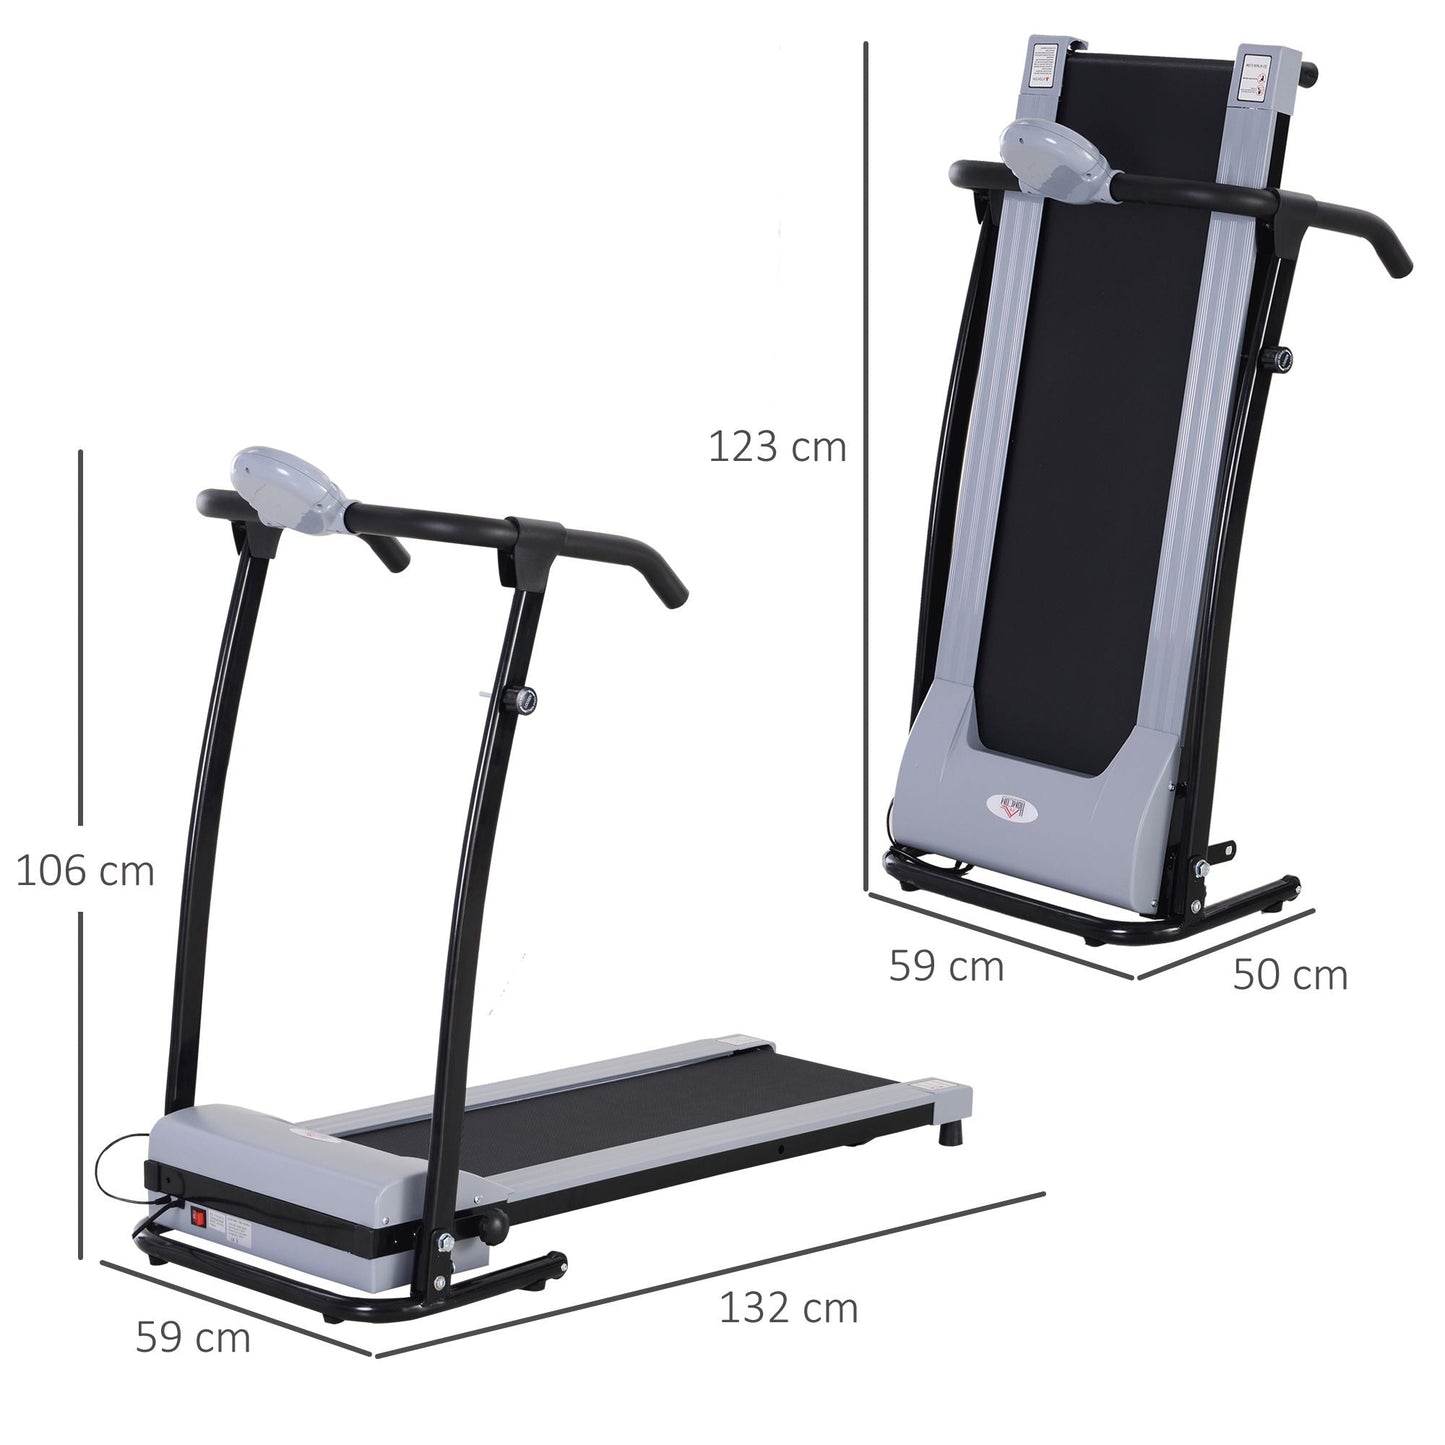 Foldable Walking Treadmill, Aerobic Exercise Machine w/ LED Display, for Home, Office, Fitness Studio